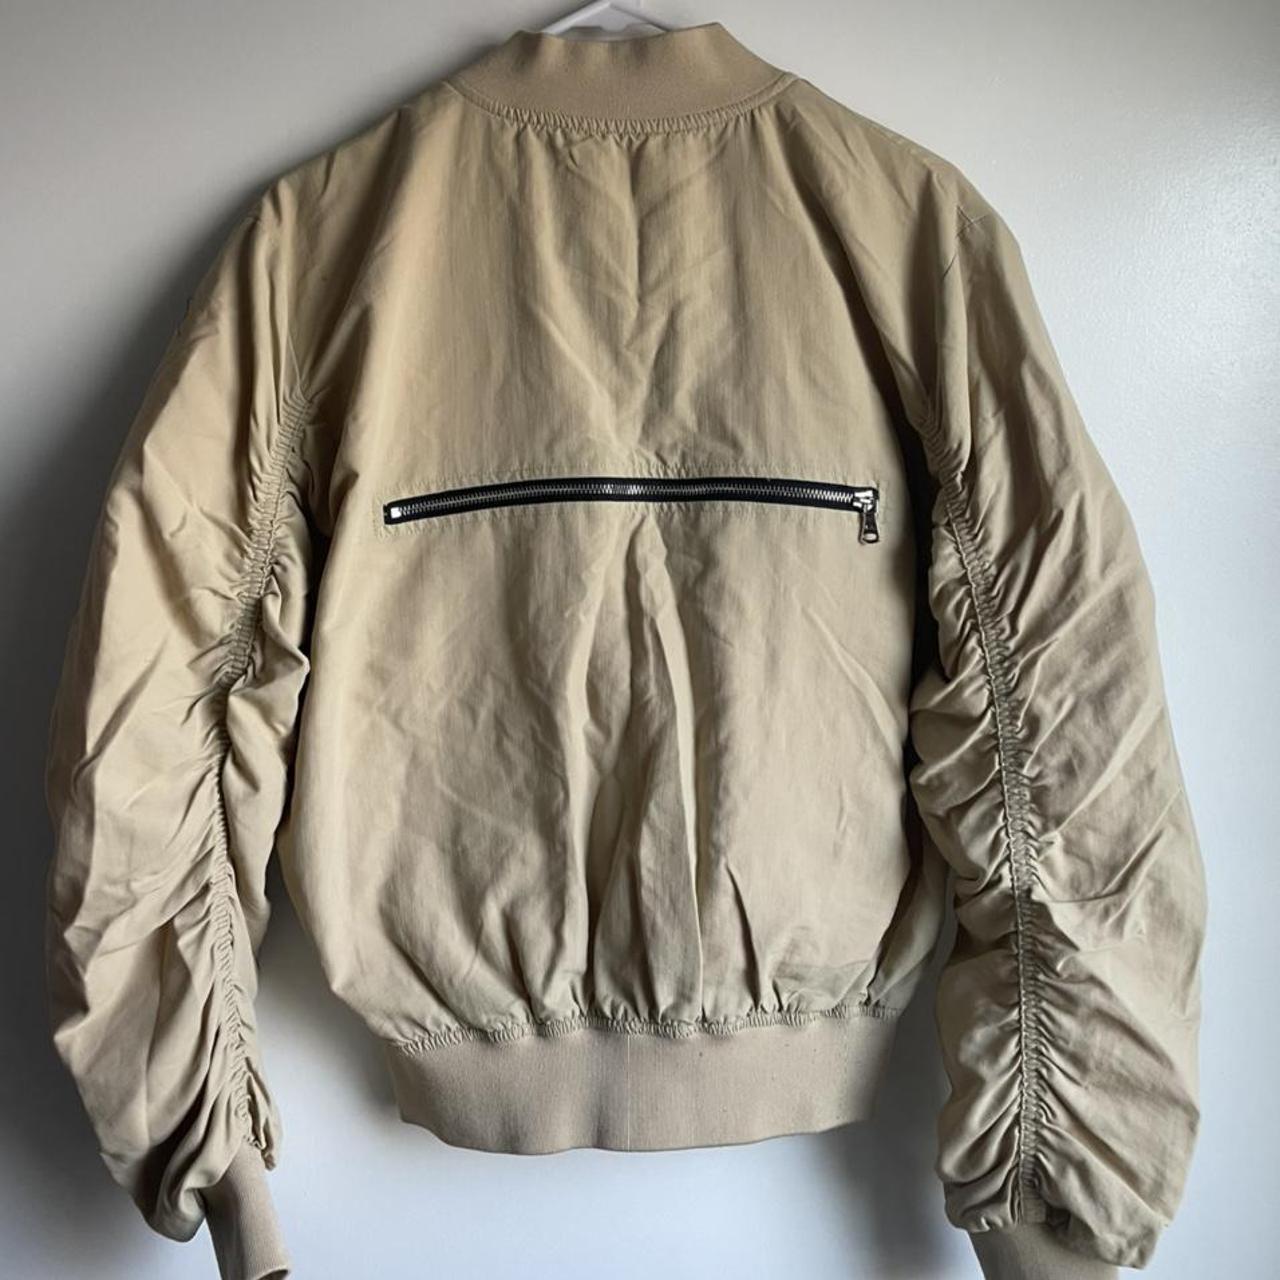 Product Image 3 - Lifted Anchors Cream Bomber Jacket
Price: